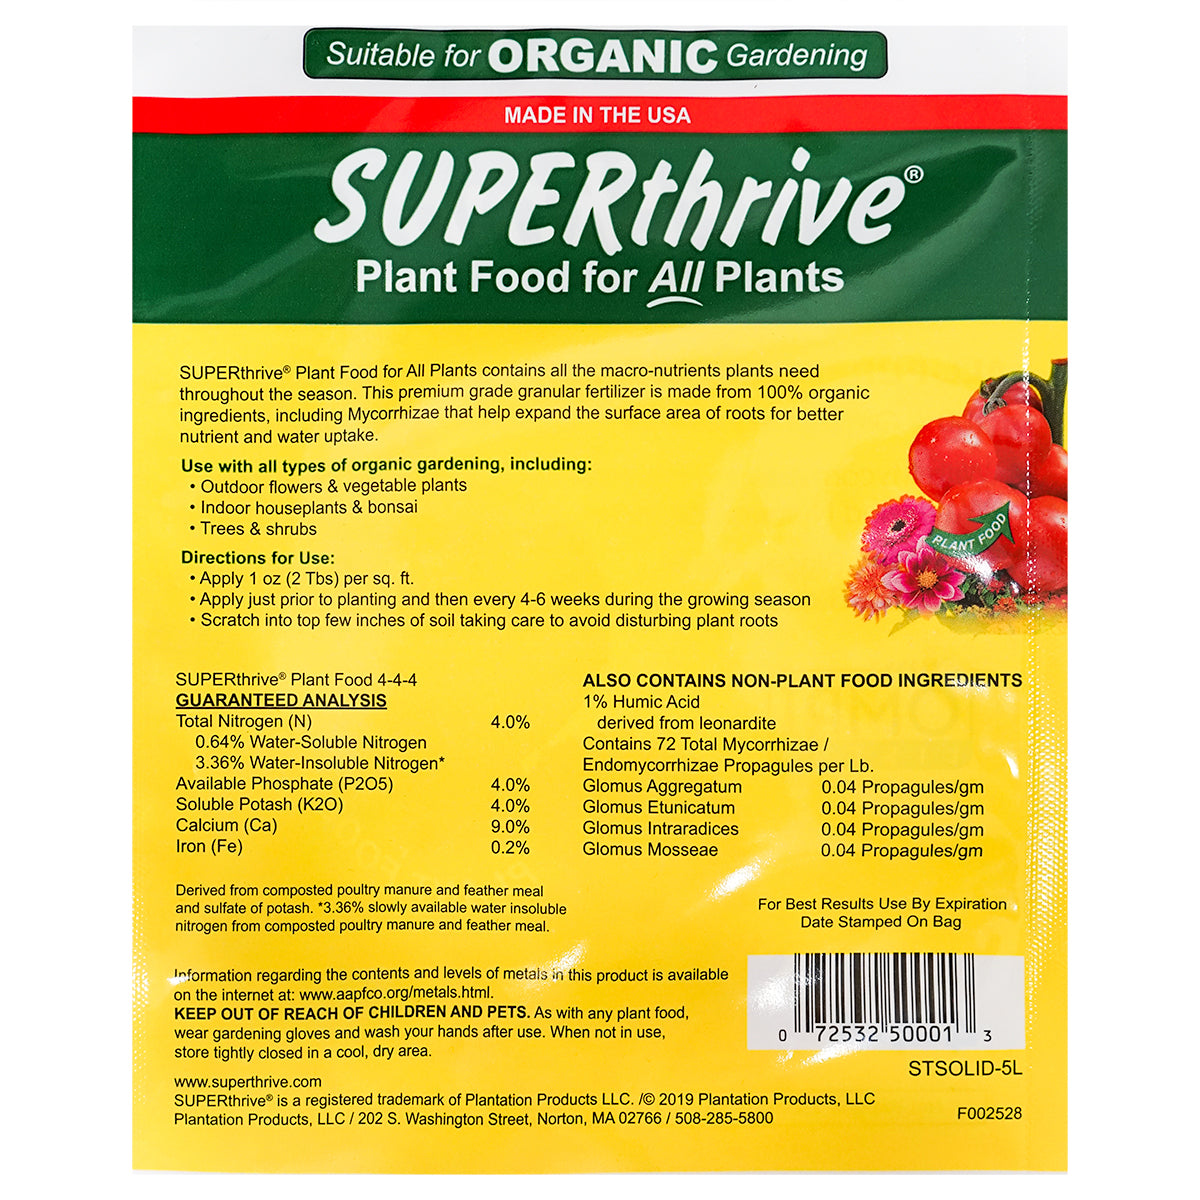 SUPERthrive Organic All-Purpose Plant Food, Solid Granular Back of Packaging